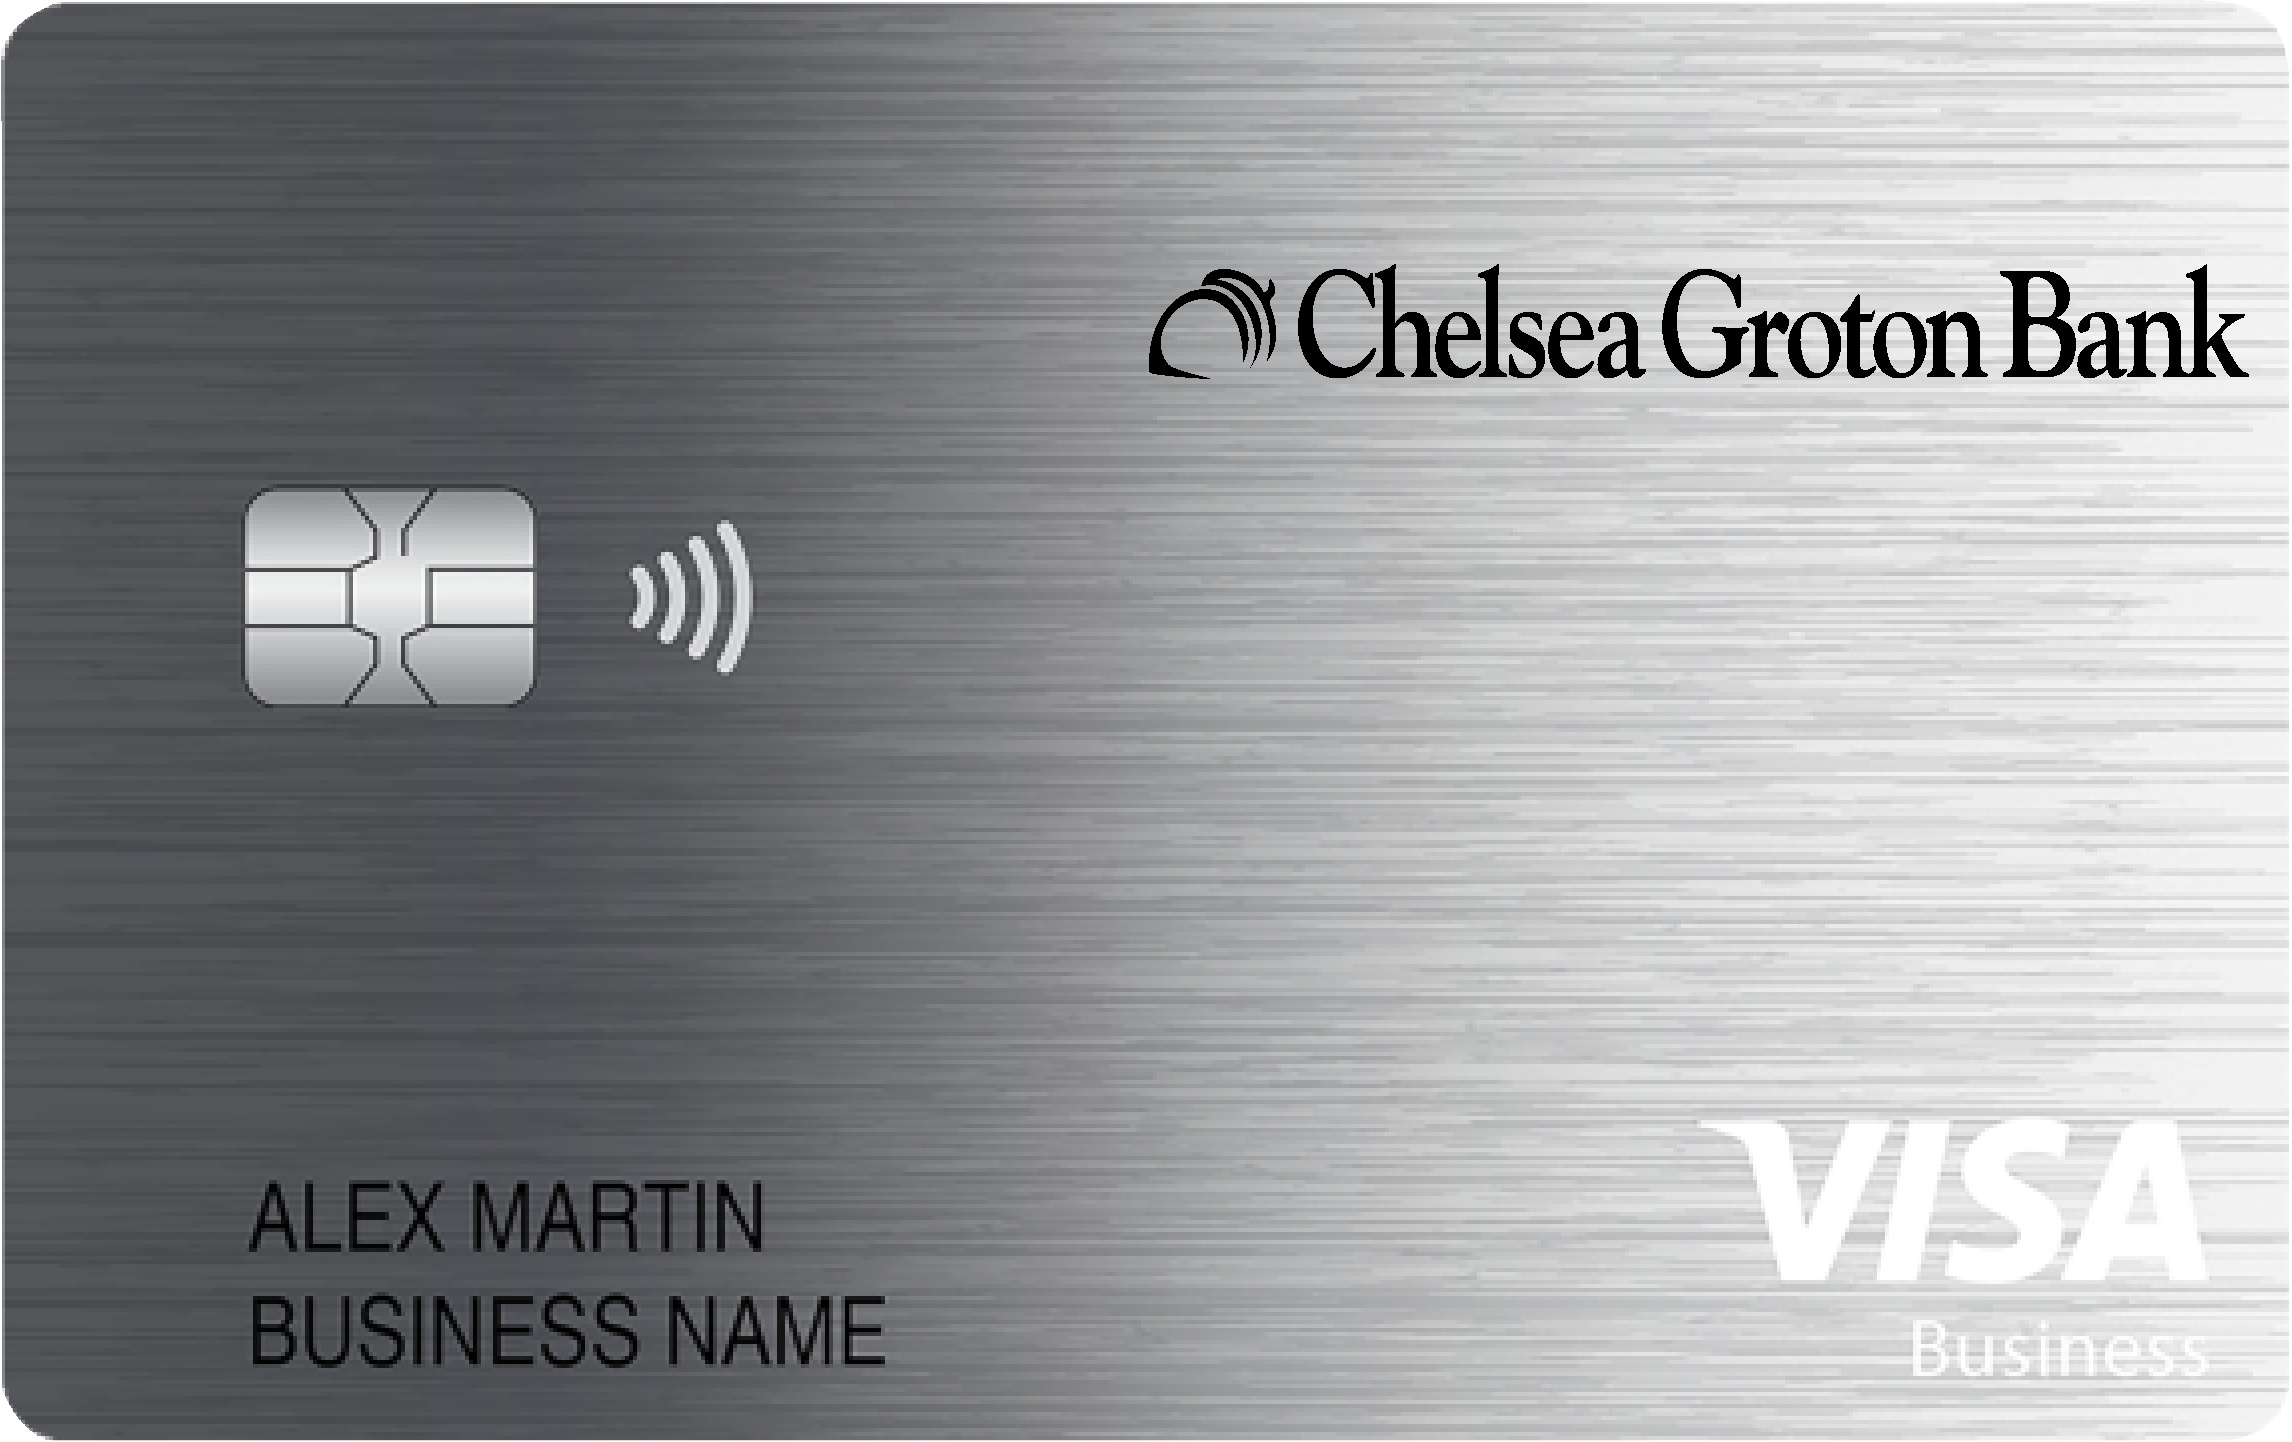 Chelsea Groton Bank Business Real Rewards Card